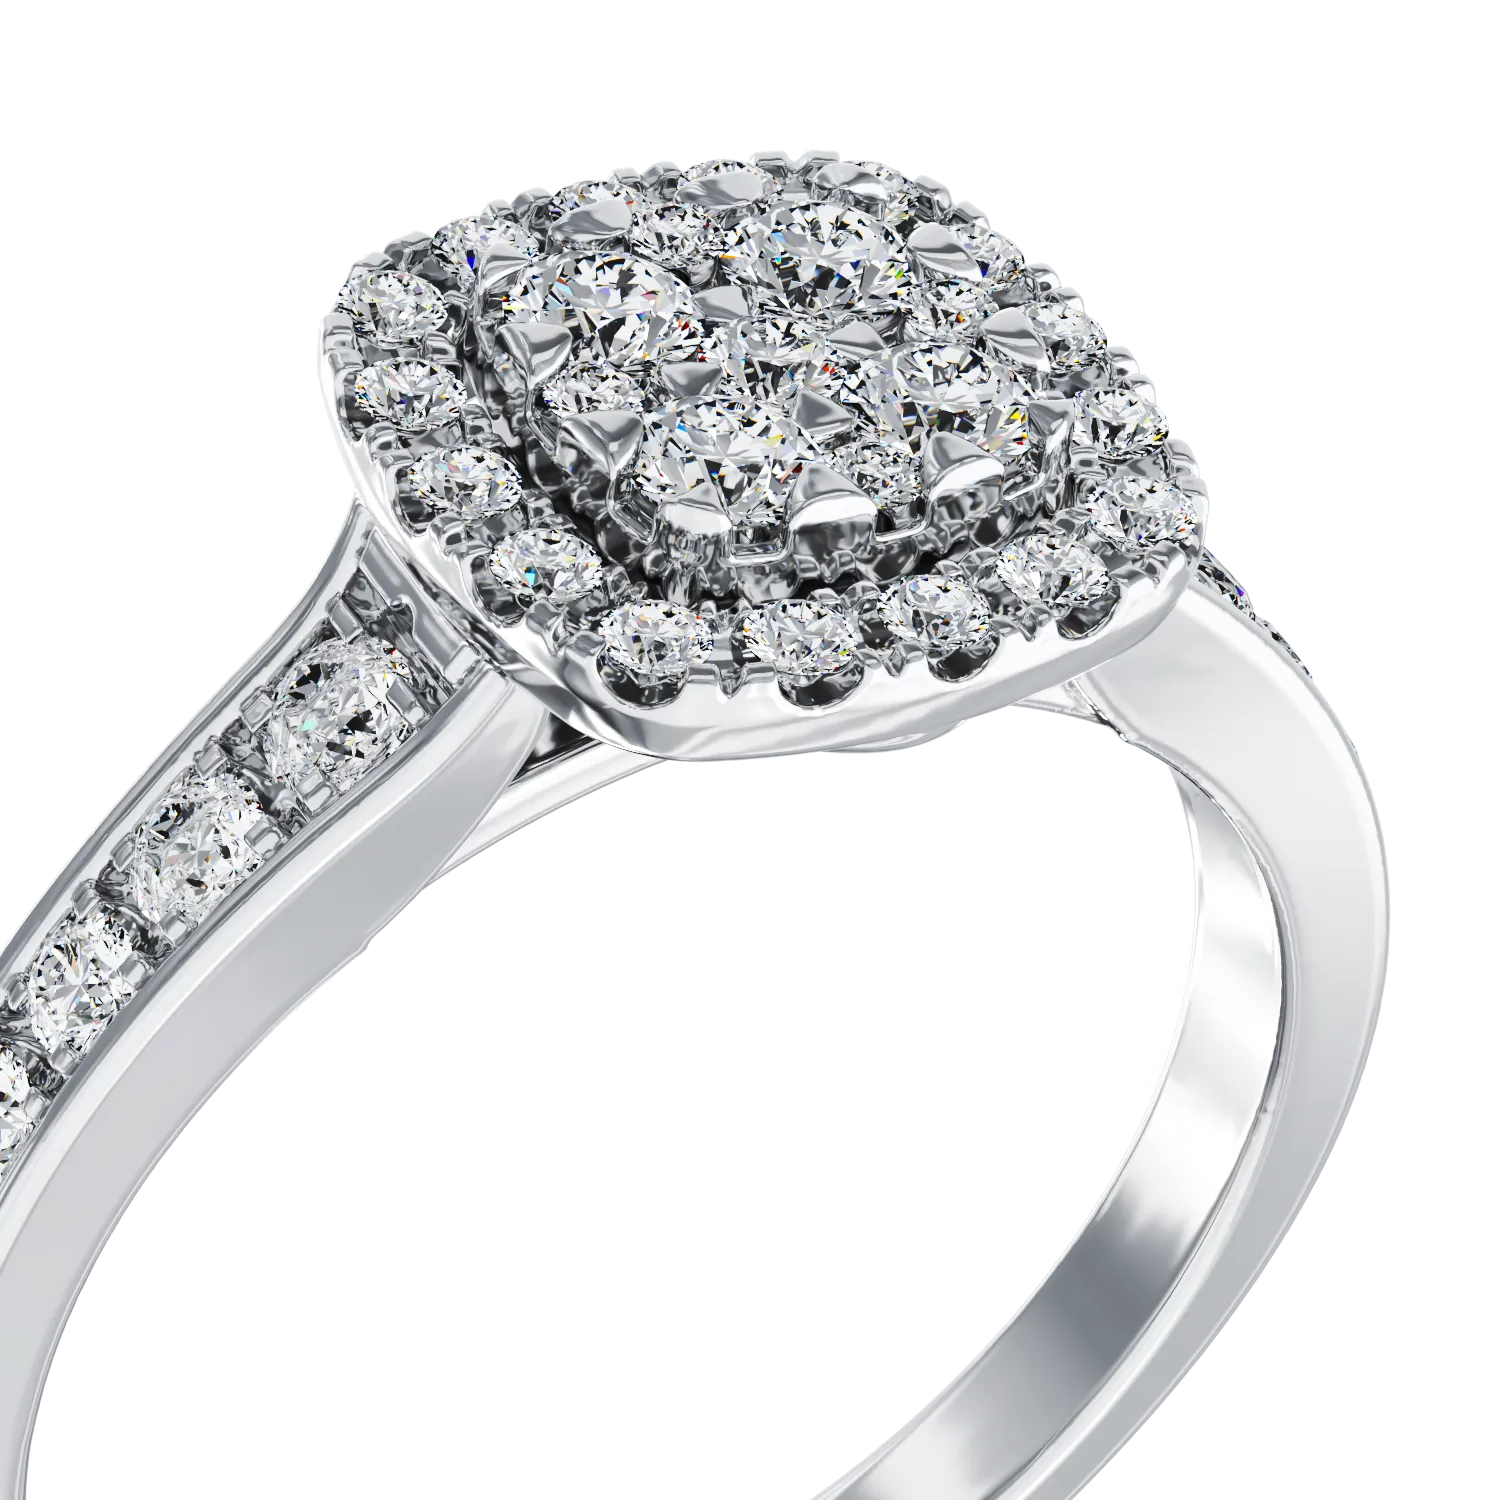 18K white gold engagement ring with 0.52ct diamonds